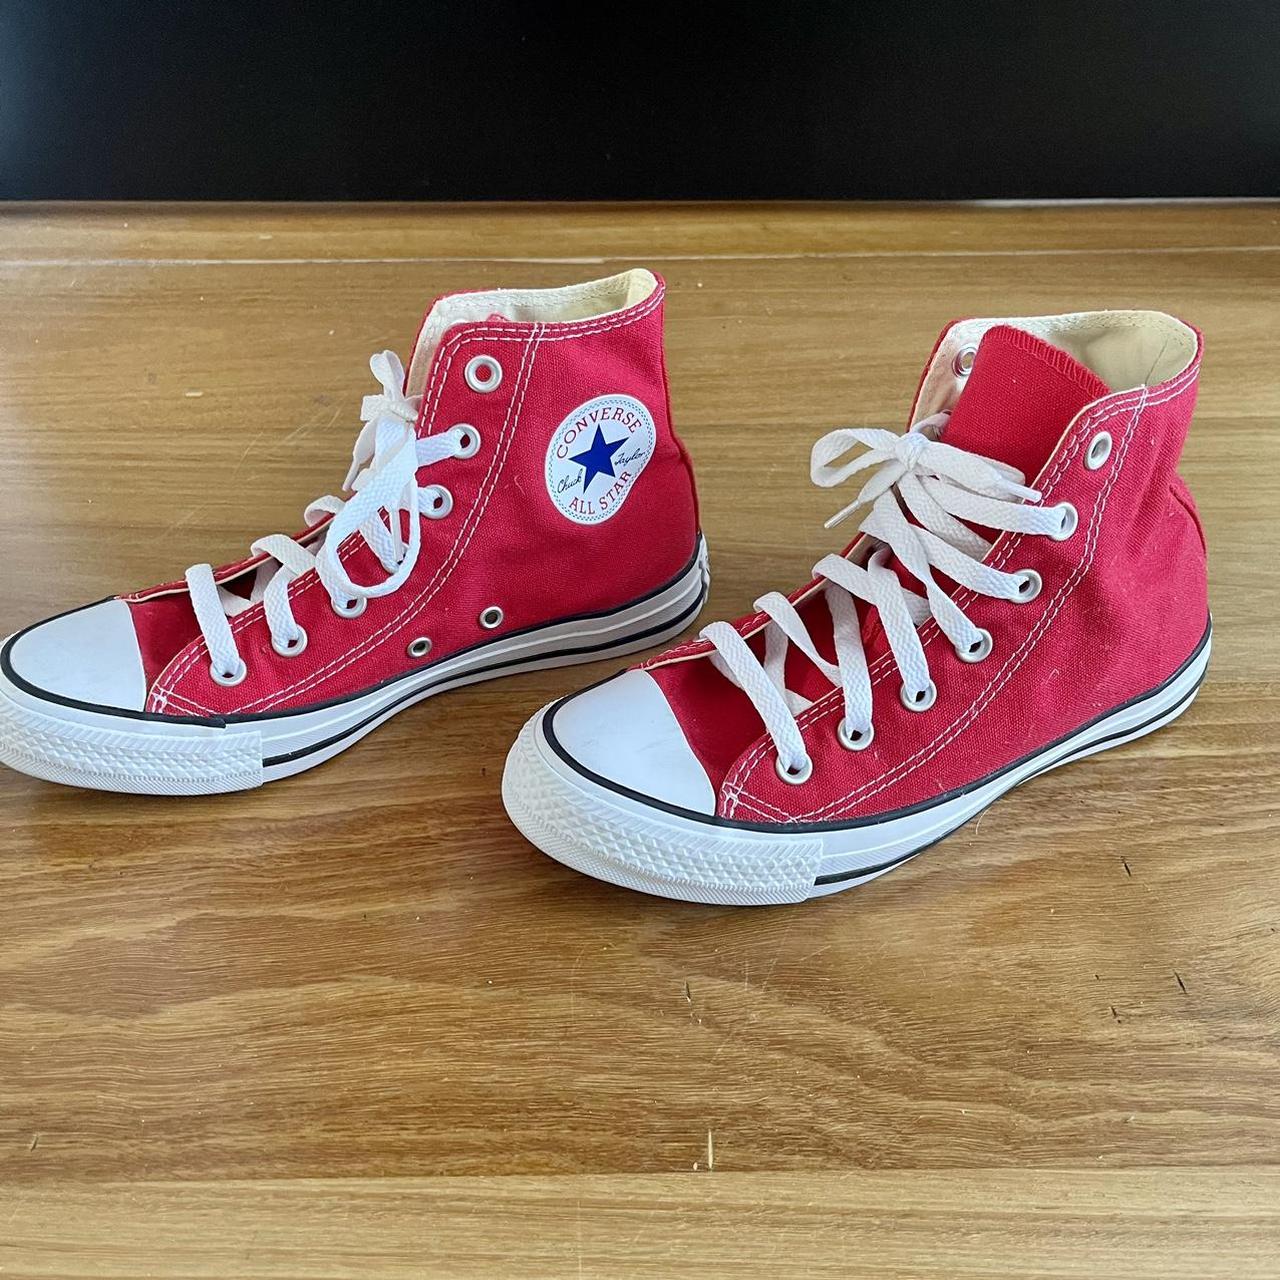 Red high top converse. Only worn once. #converse... - Depop